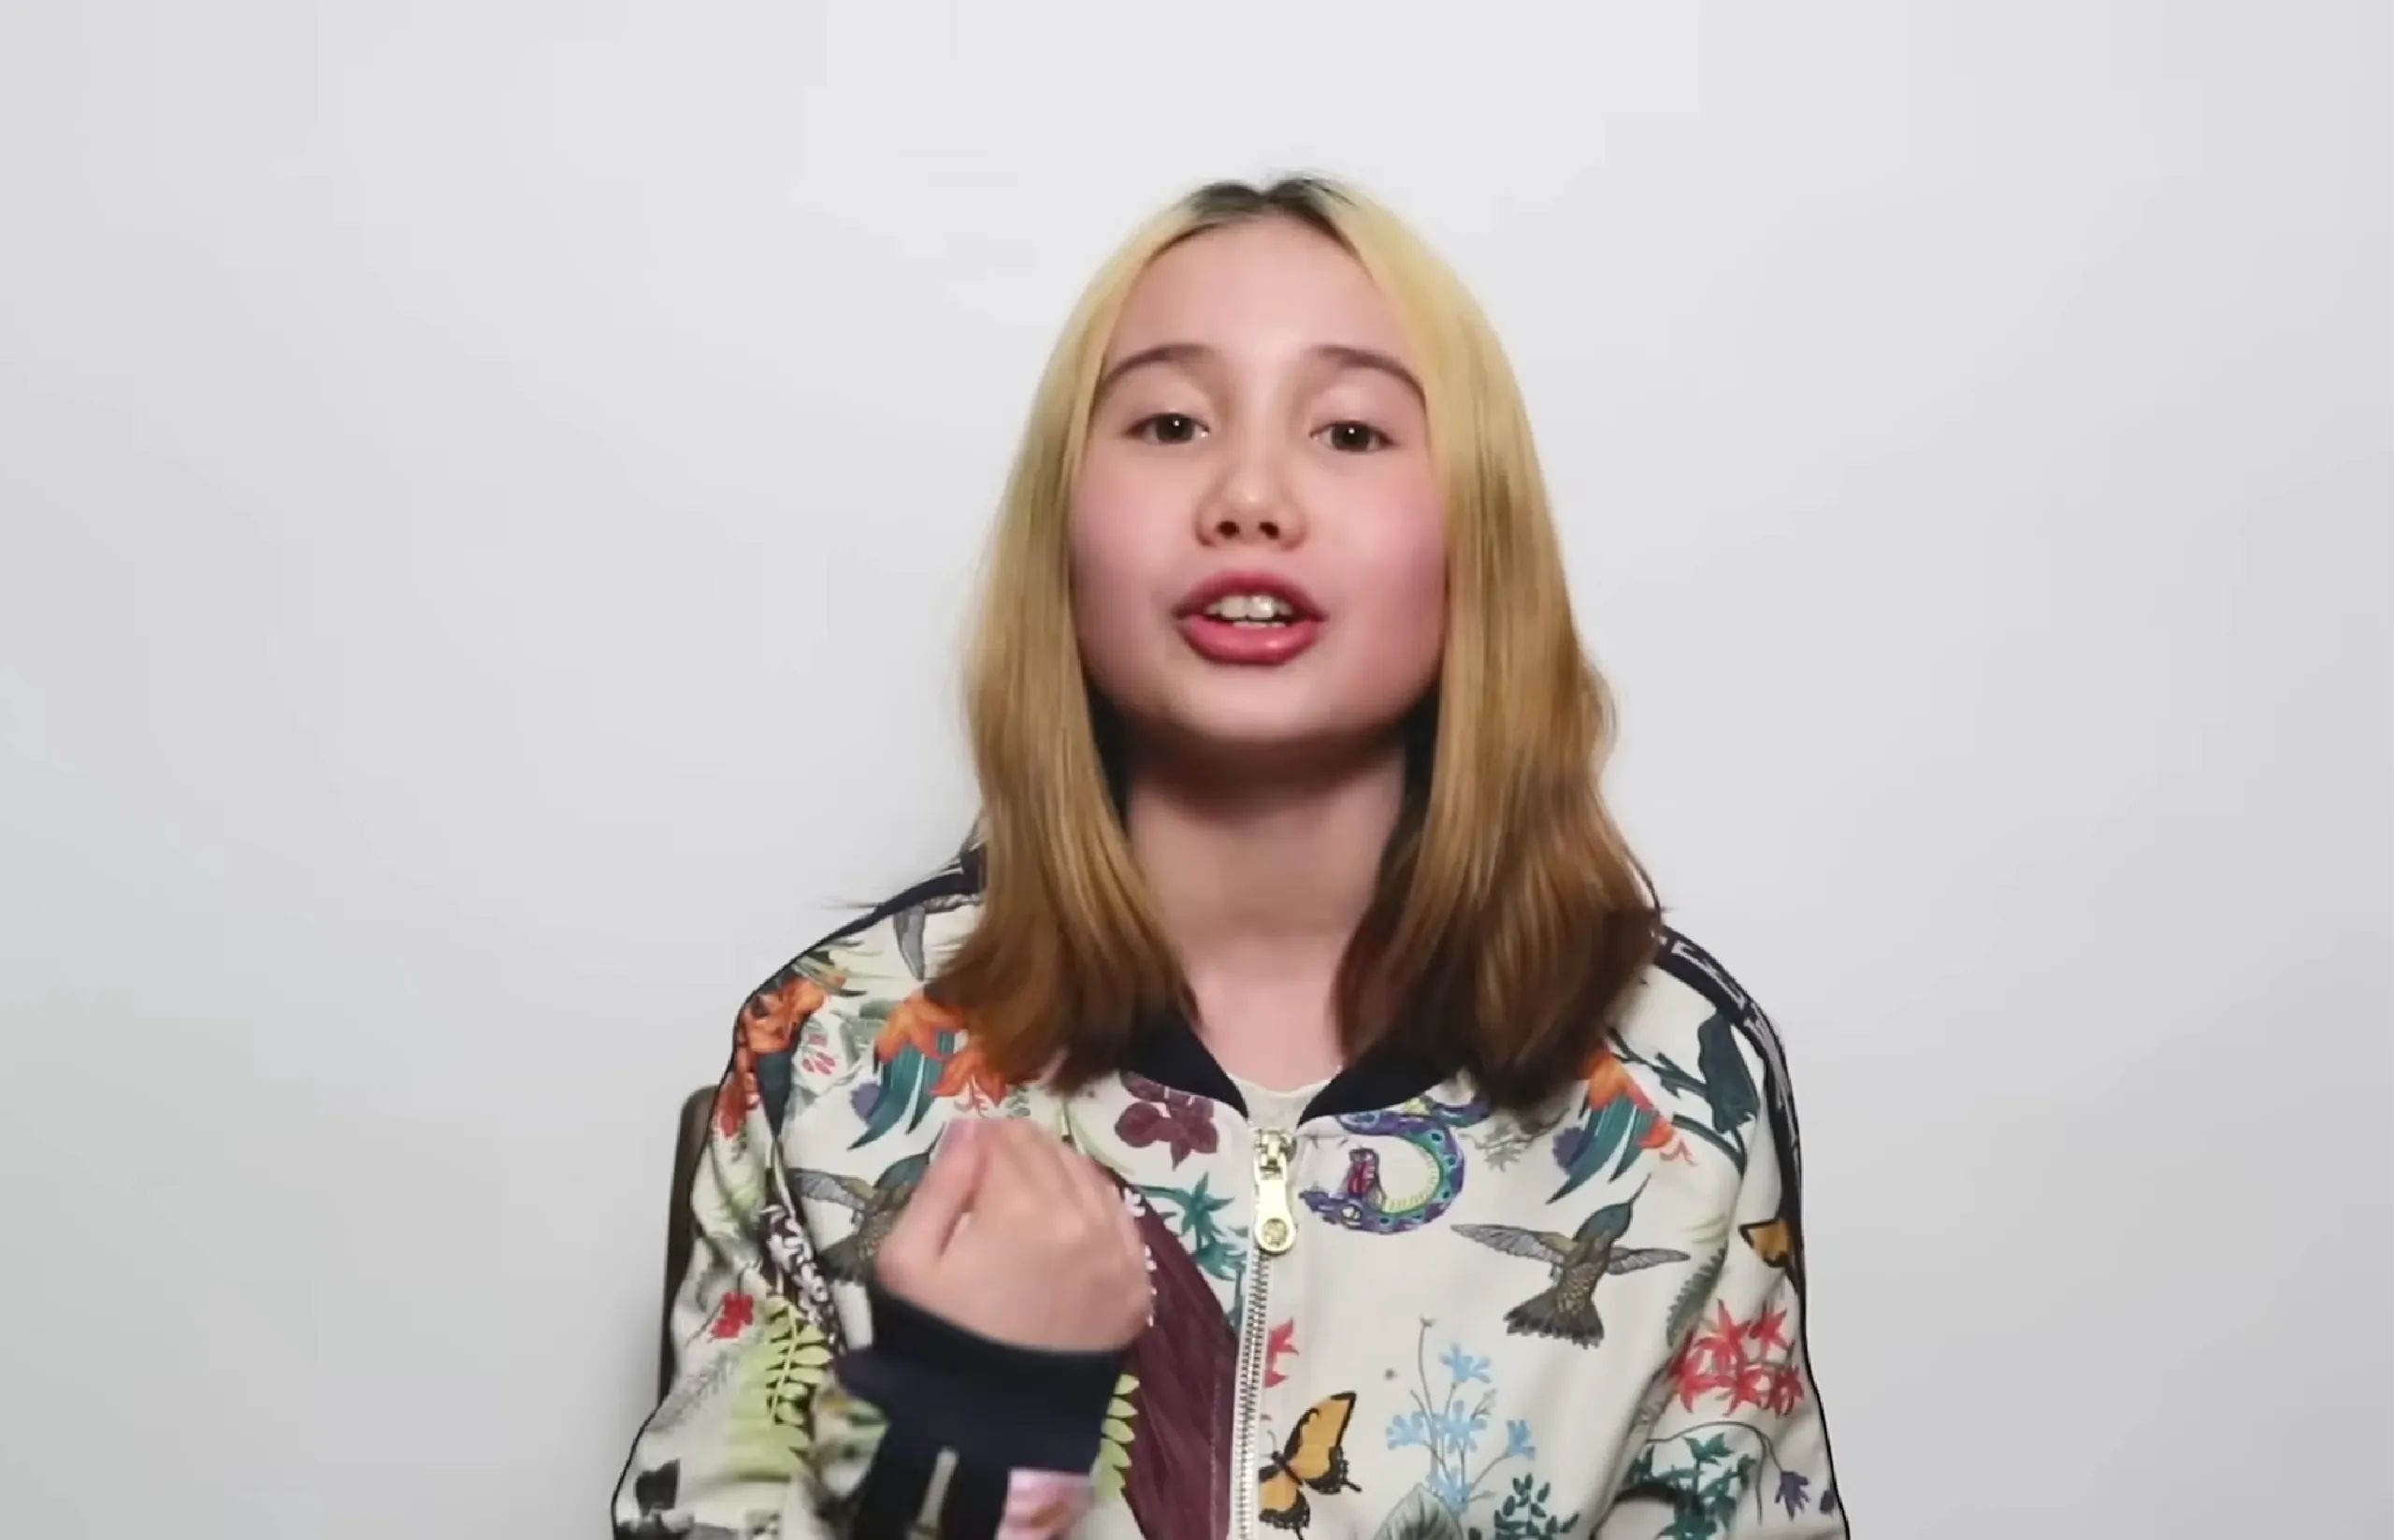 Newly Spotted Lil Tay Emerges From 5-Year Hiatus, Quashing Death Hoax Rumors